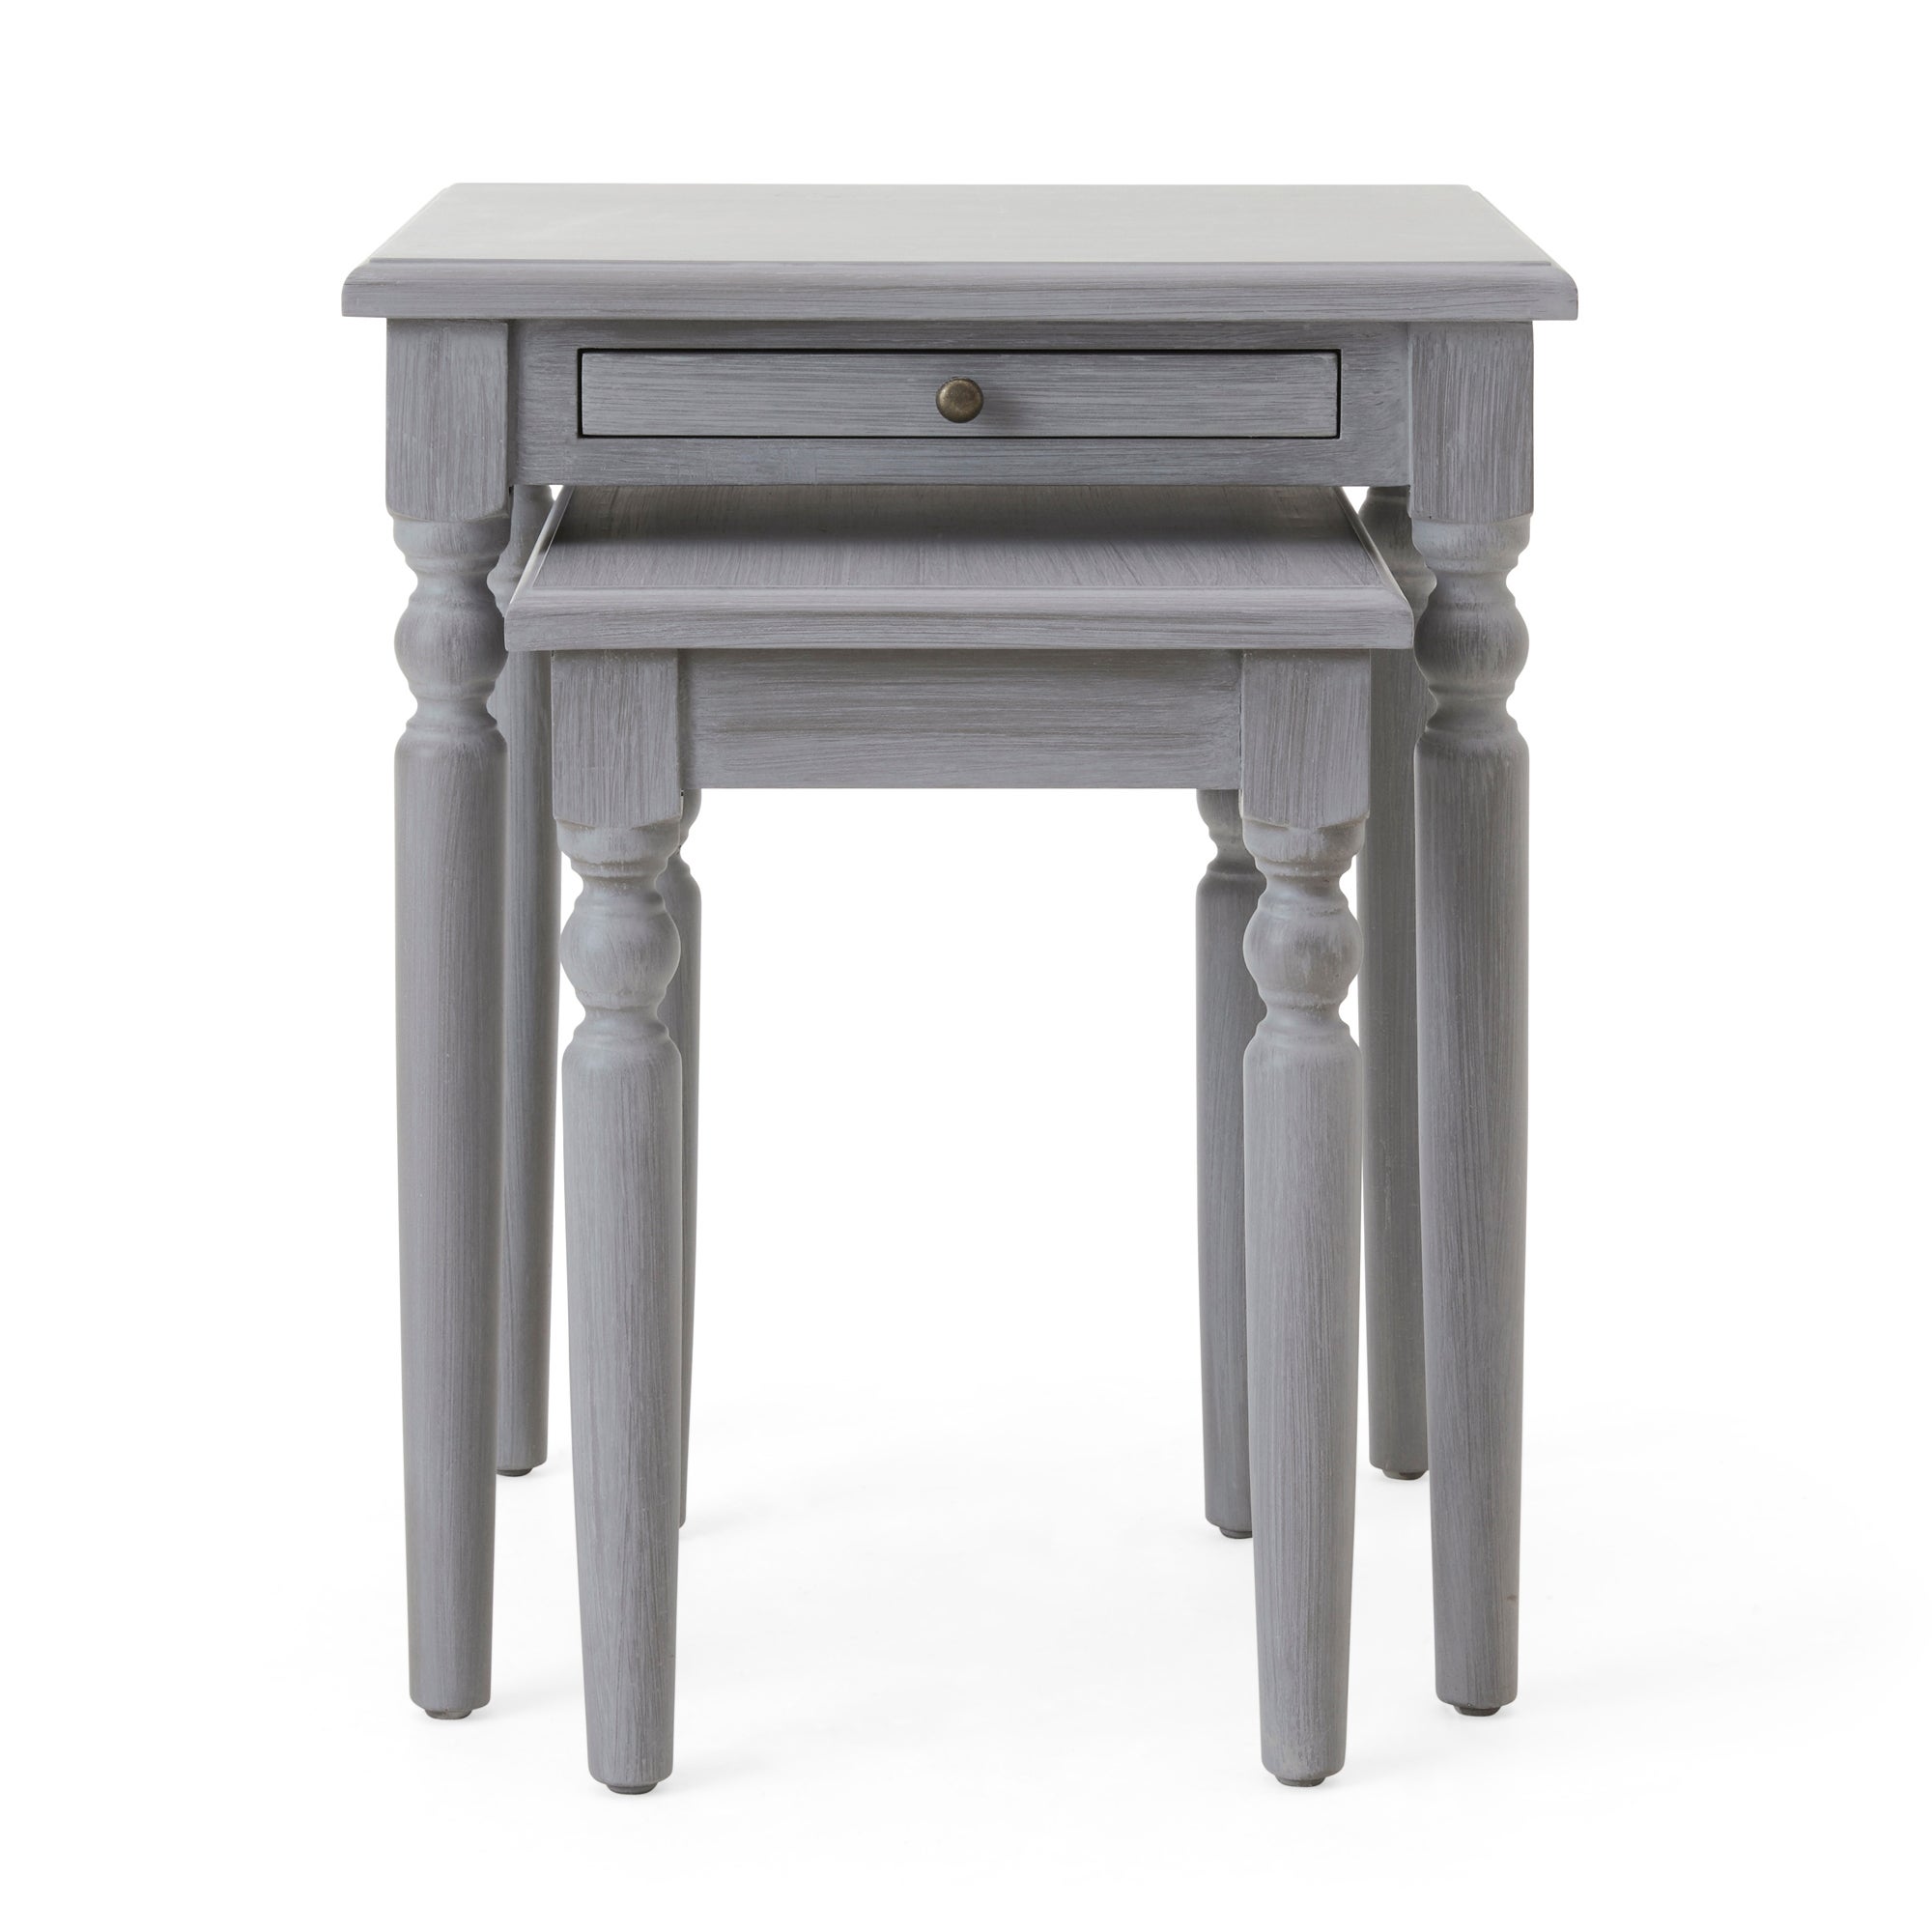 Lucy Cane Nest of Tables, Grey